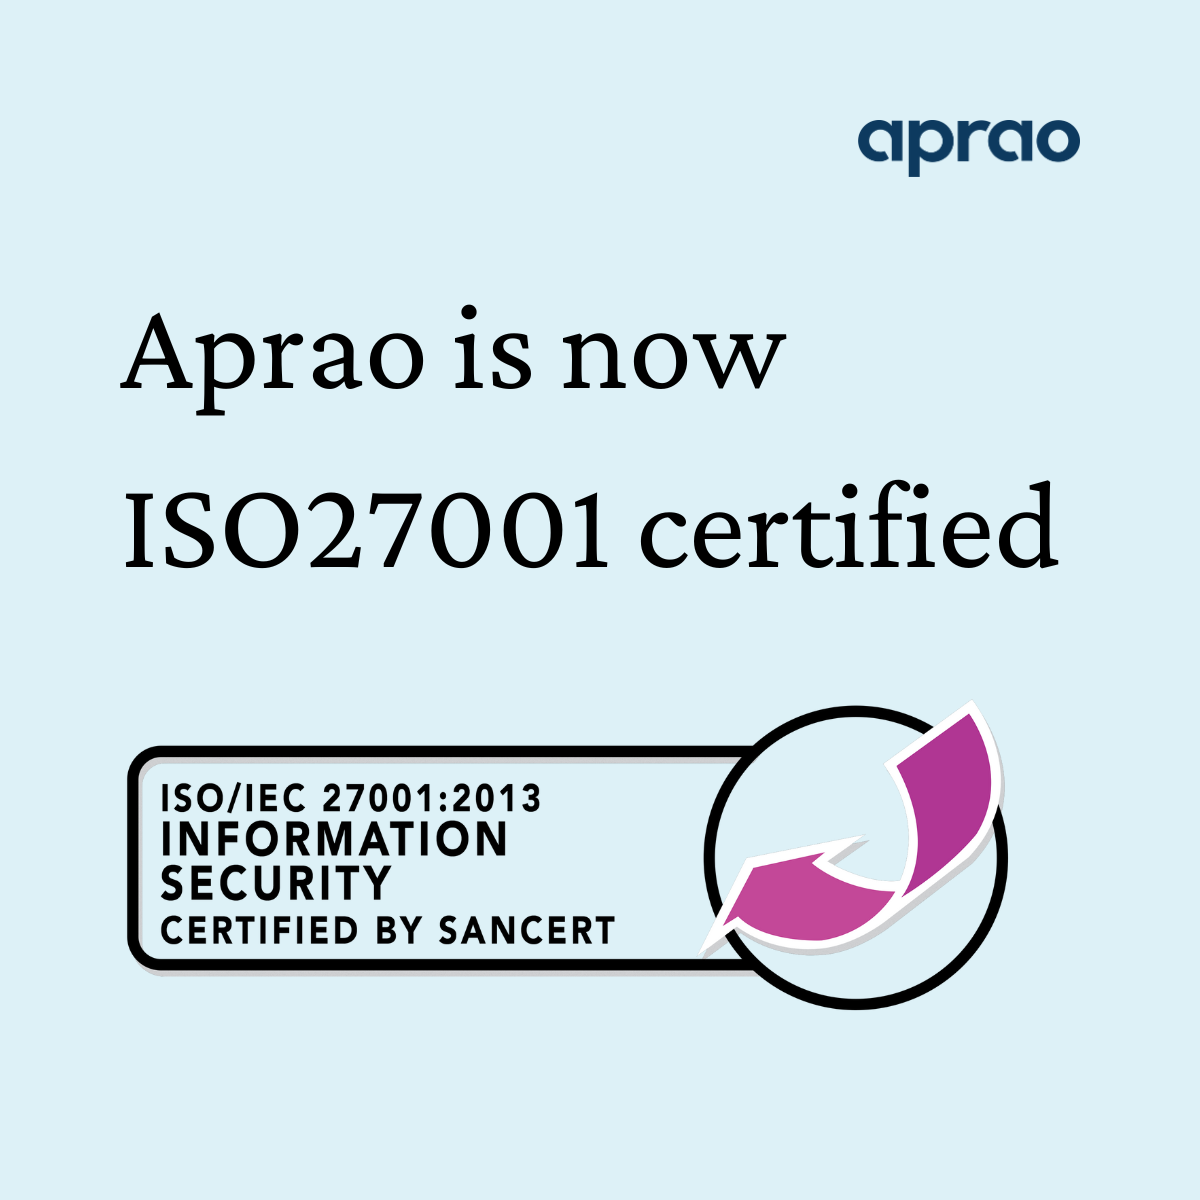 Aprao is now ISO27001 certified